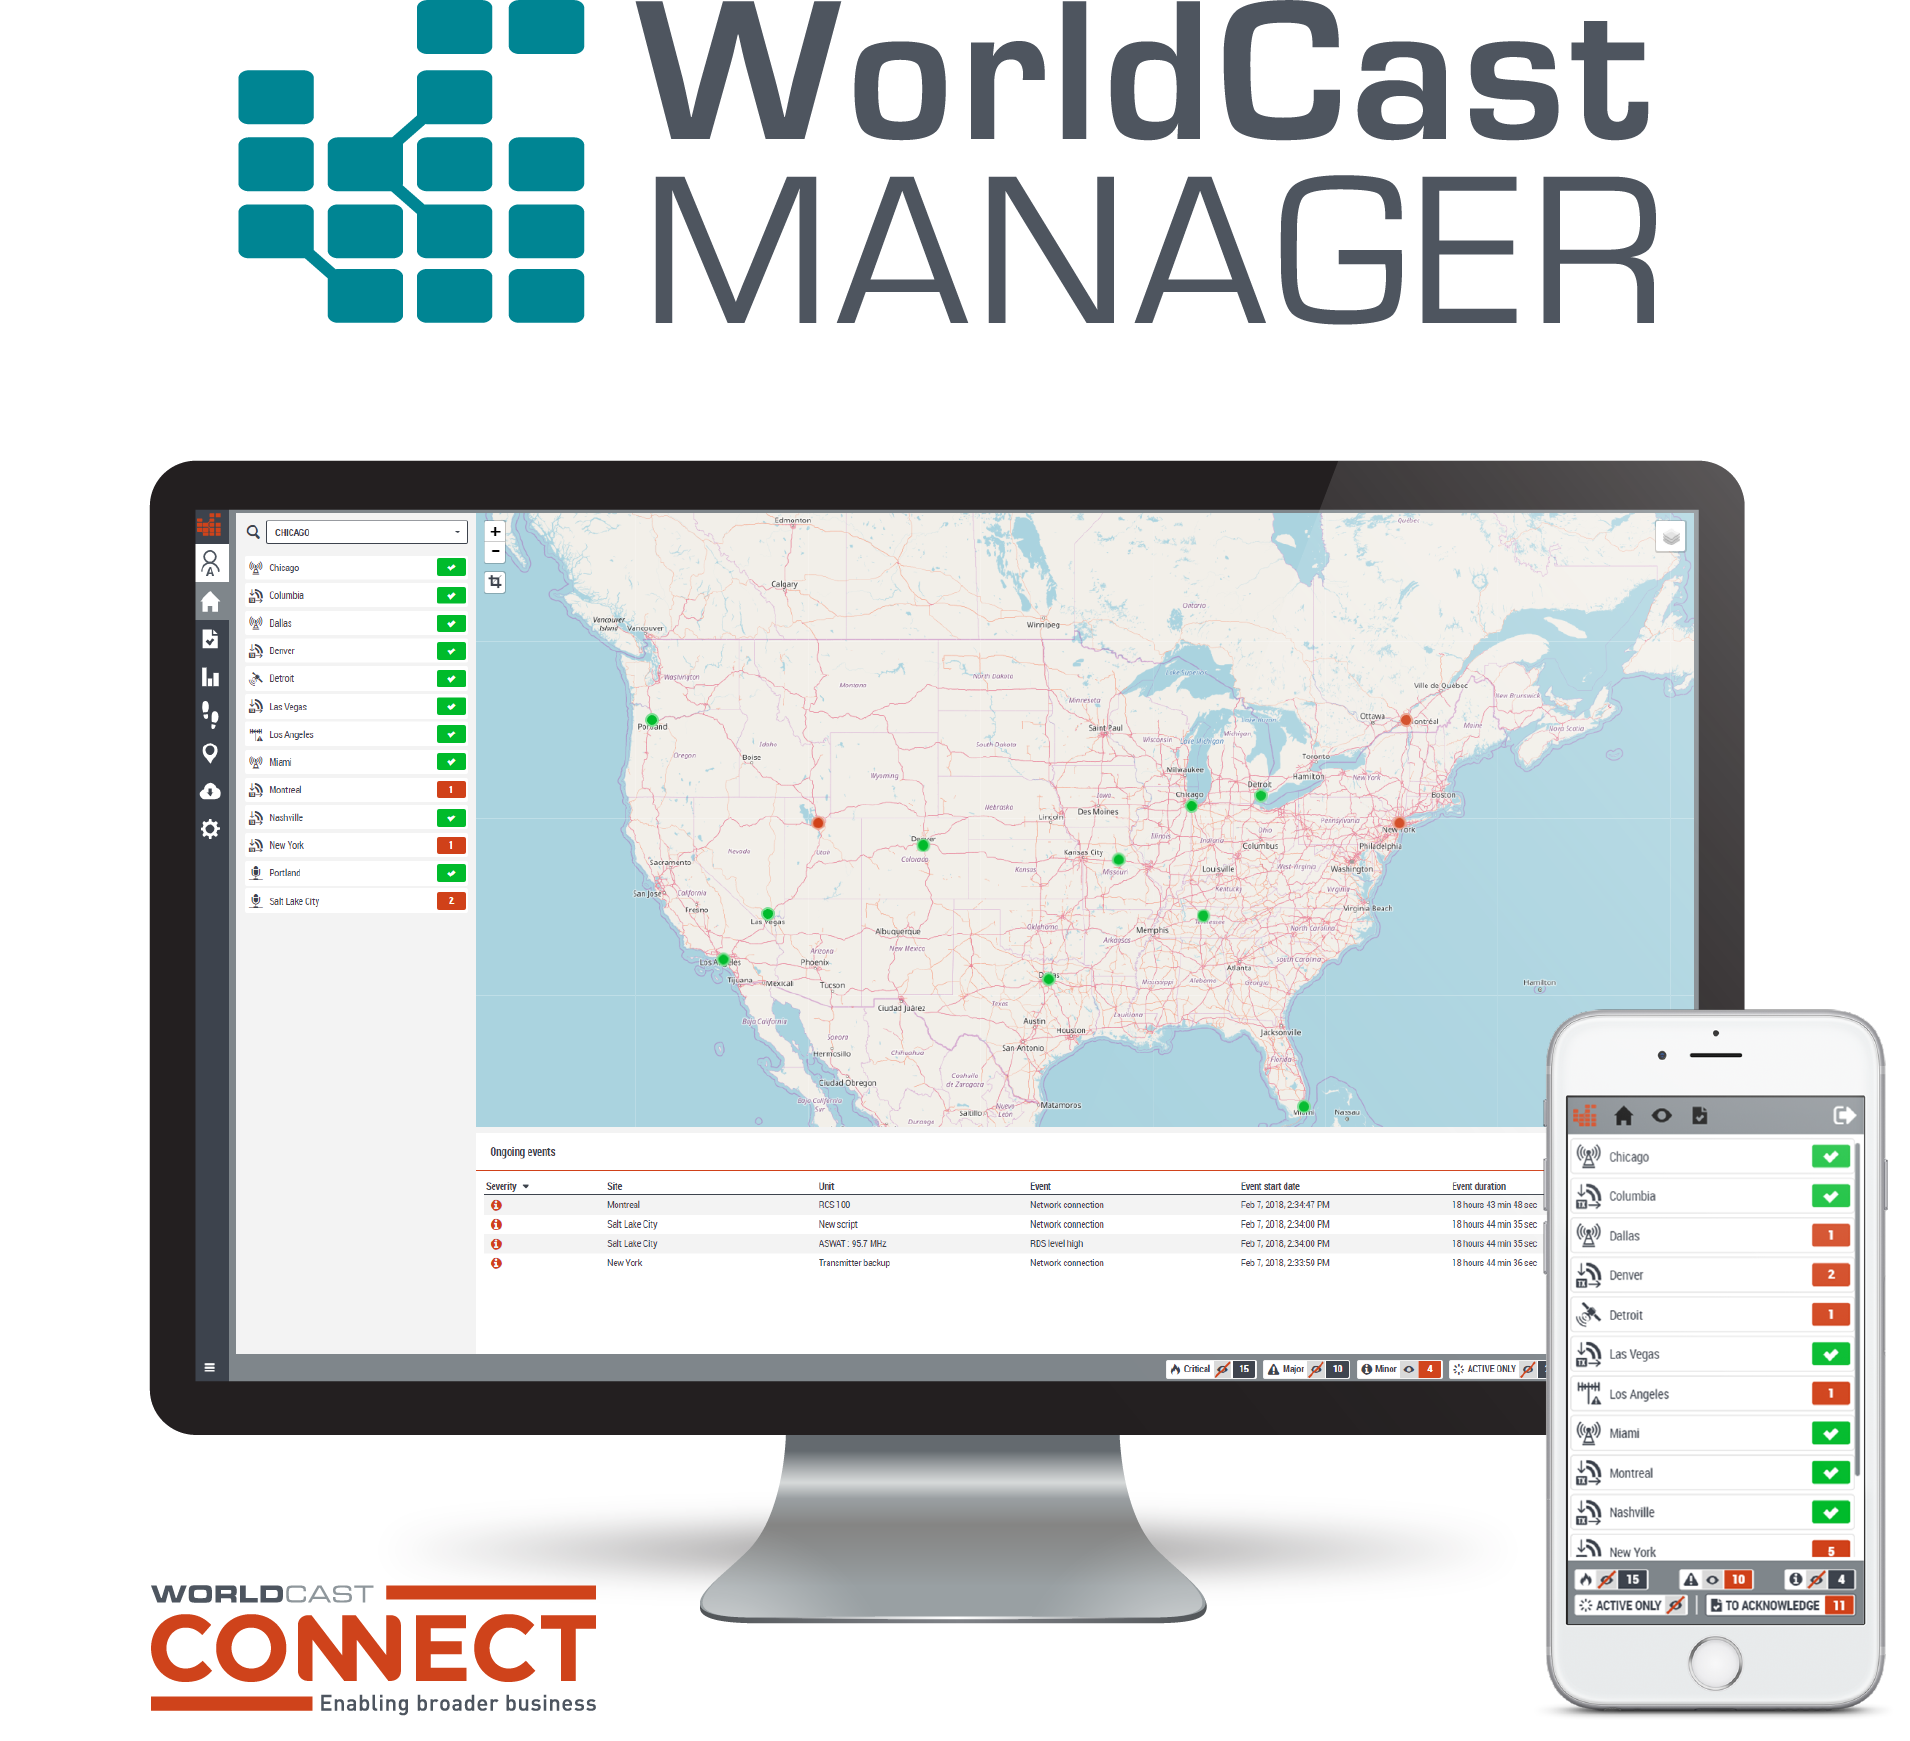 IBC launch of the WorldCast Manager’s new software redundancy model